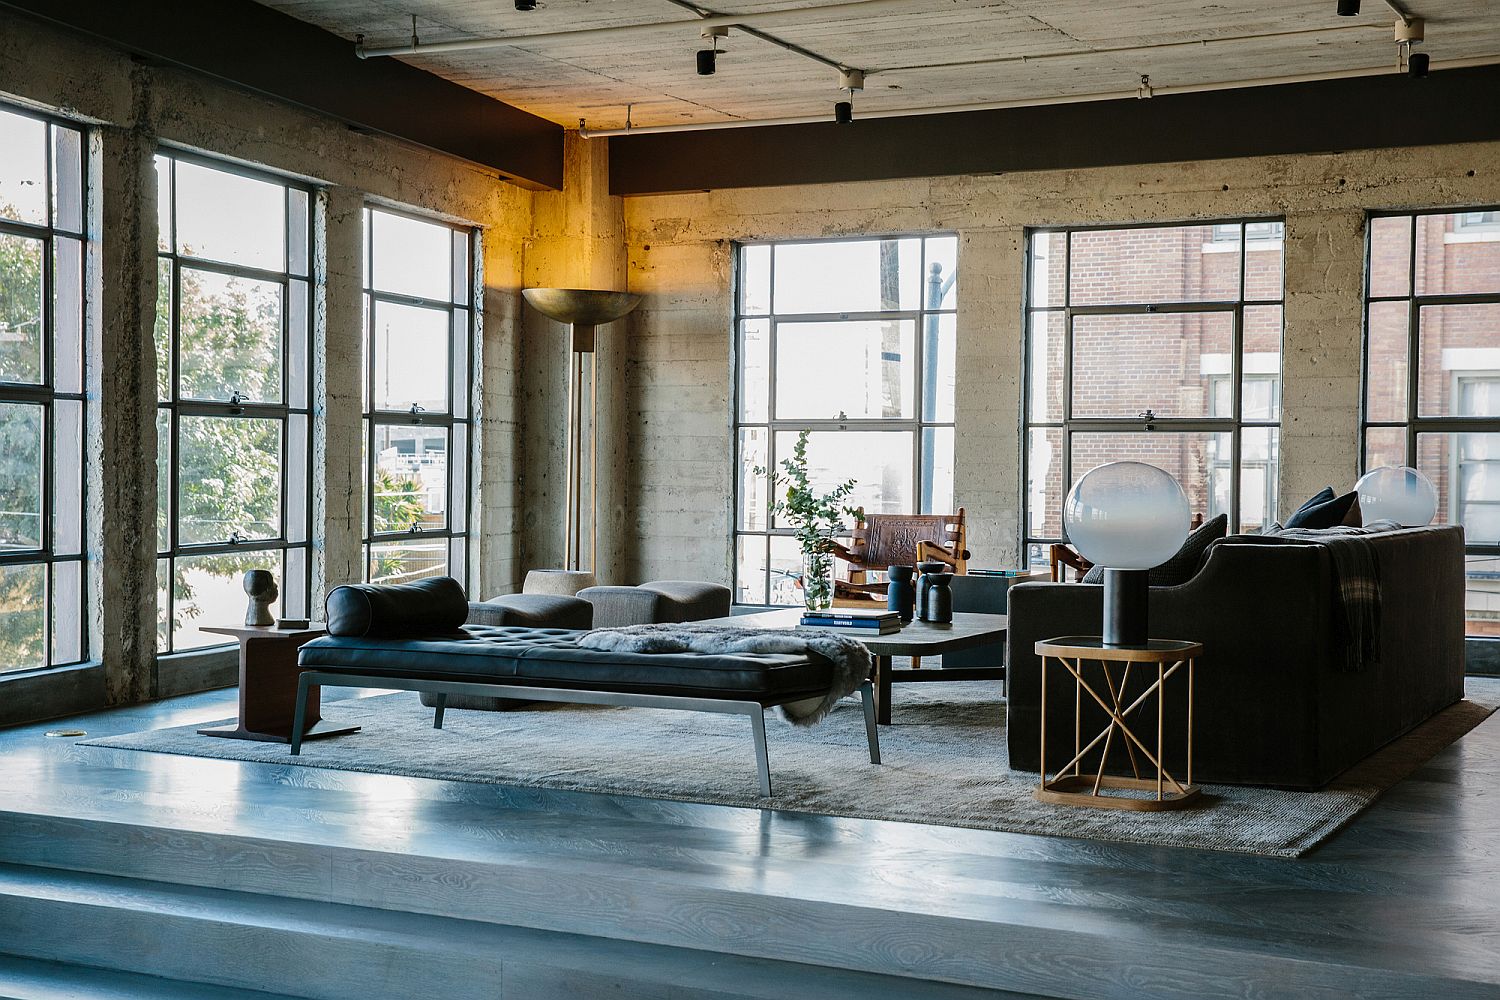 Metallic accents, modern decor and lovely lighting enliven the industrial interior